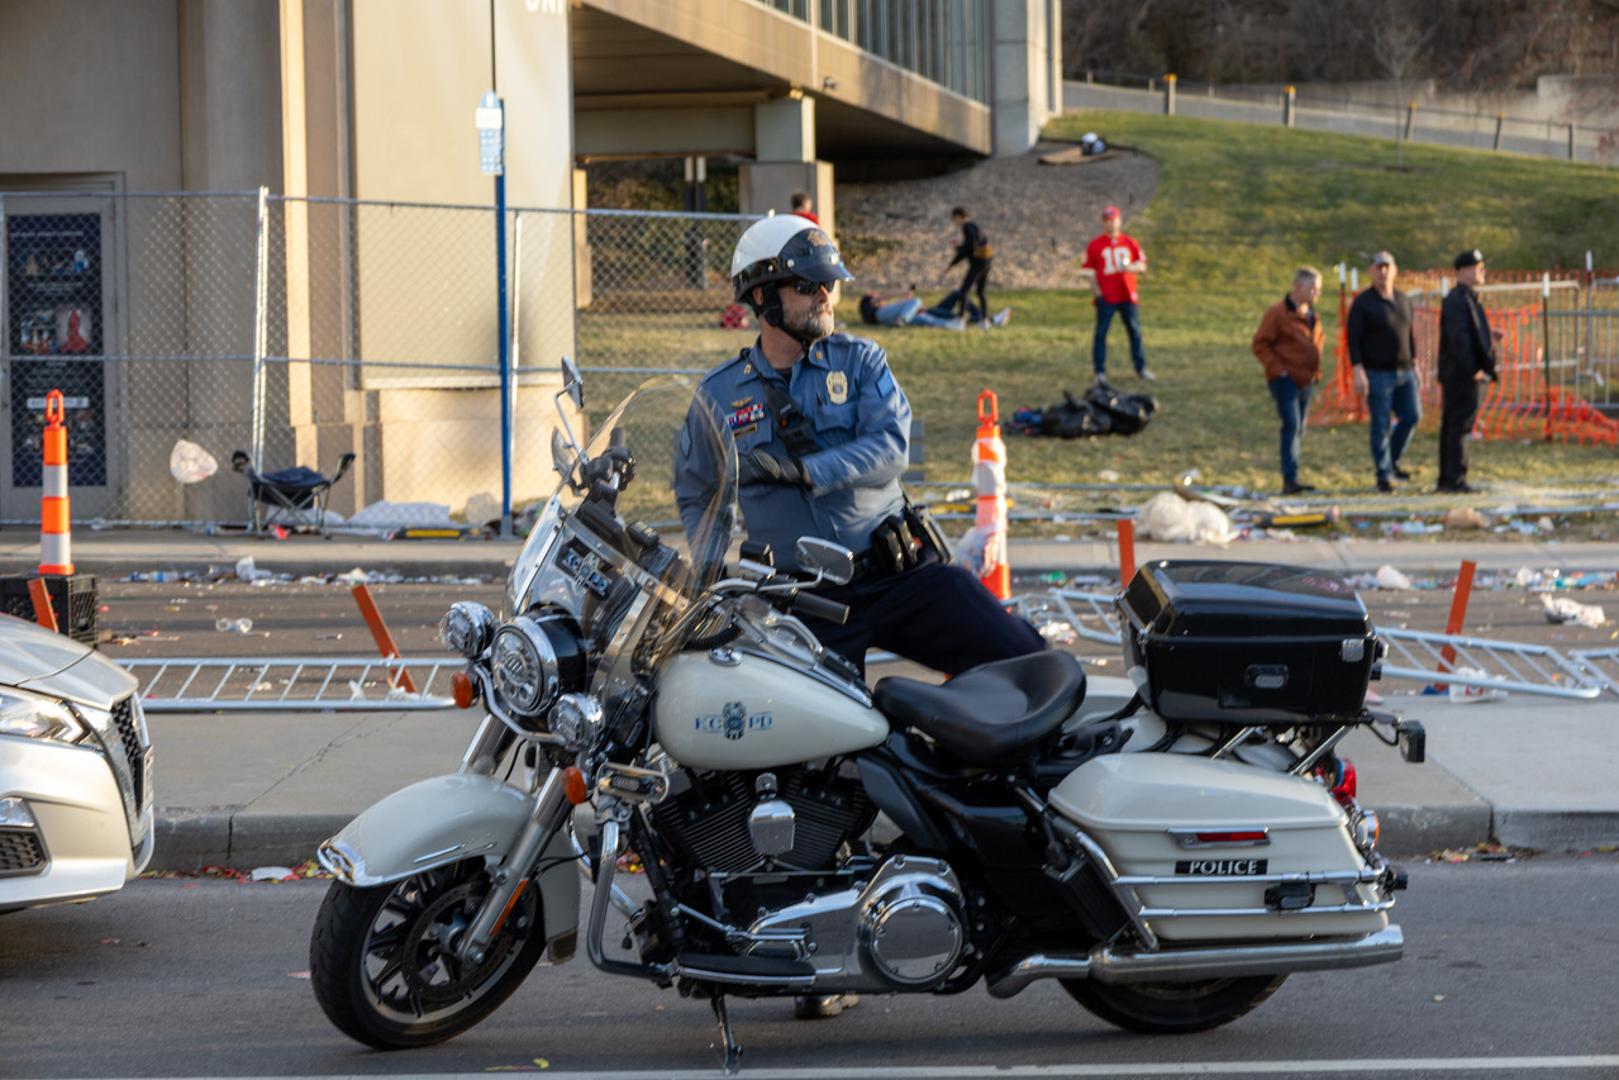 (240215) -- KANSAS CITY, Feb. 15, 2024 (Xinhua) -- A policeman works at the site following a shooting in Kansas City, Missouri, the United States, Feb. 14, 2024. At least one person was killed and 22 were injured as gunfire erupted during the Kansas City Chiefs' Super Bowl victory parade in Kansas City, U.S. state of Missouri, Stacey Graves, chief of the Kansas City Missouri Police Department, said at a news conference on Wednesday afternoon. (Photo by Robert Reed/Xinhua) Photo: Robert Reed/XINHUA